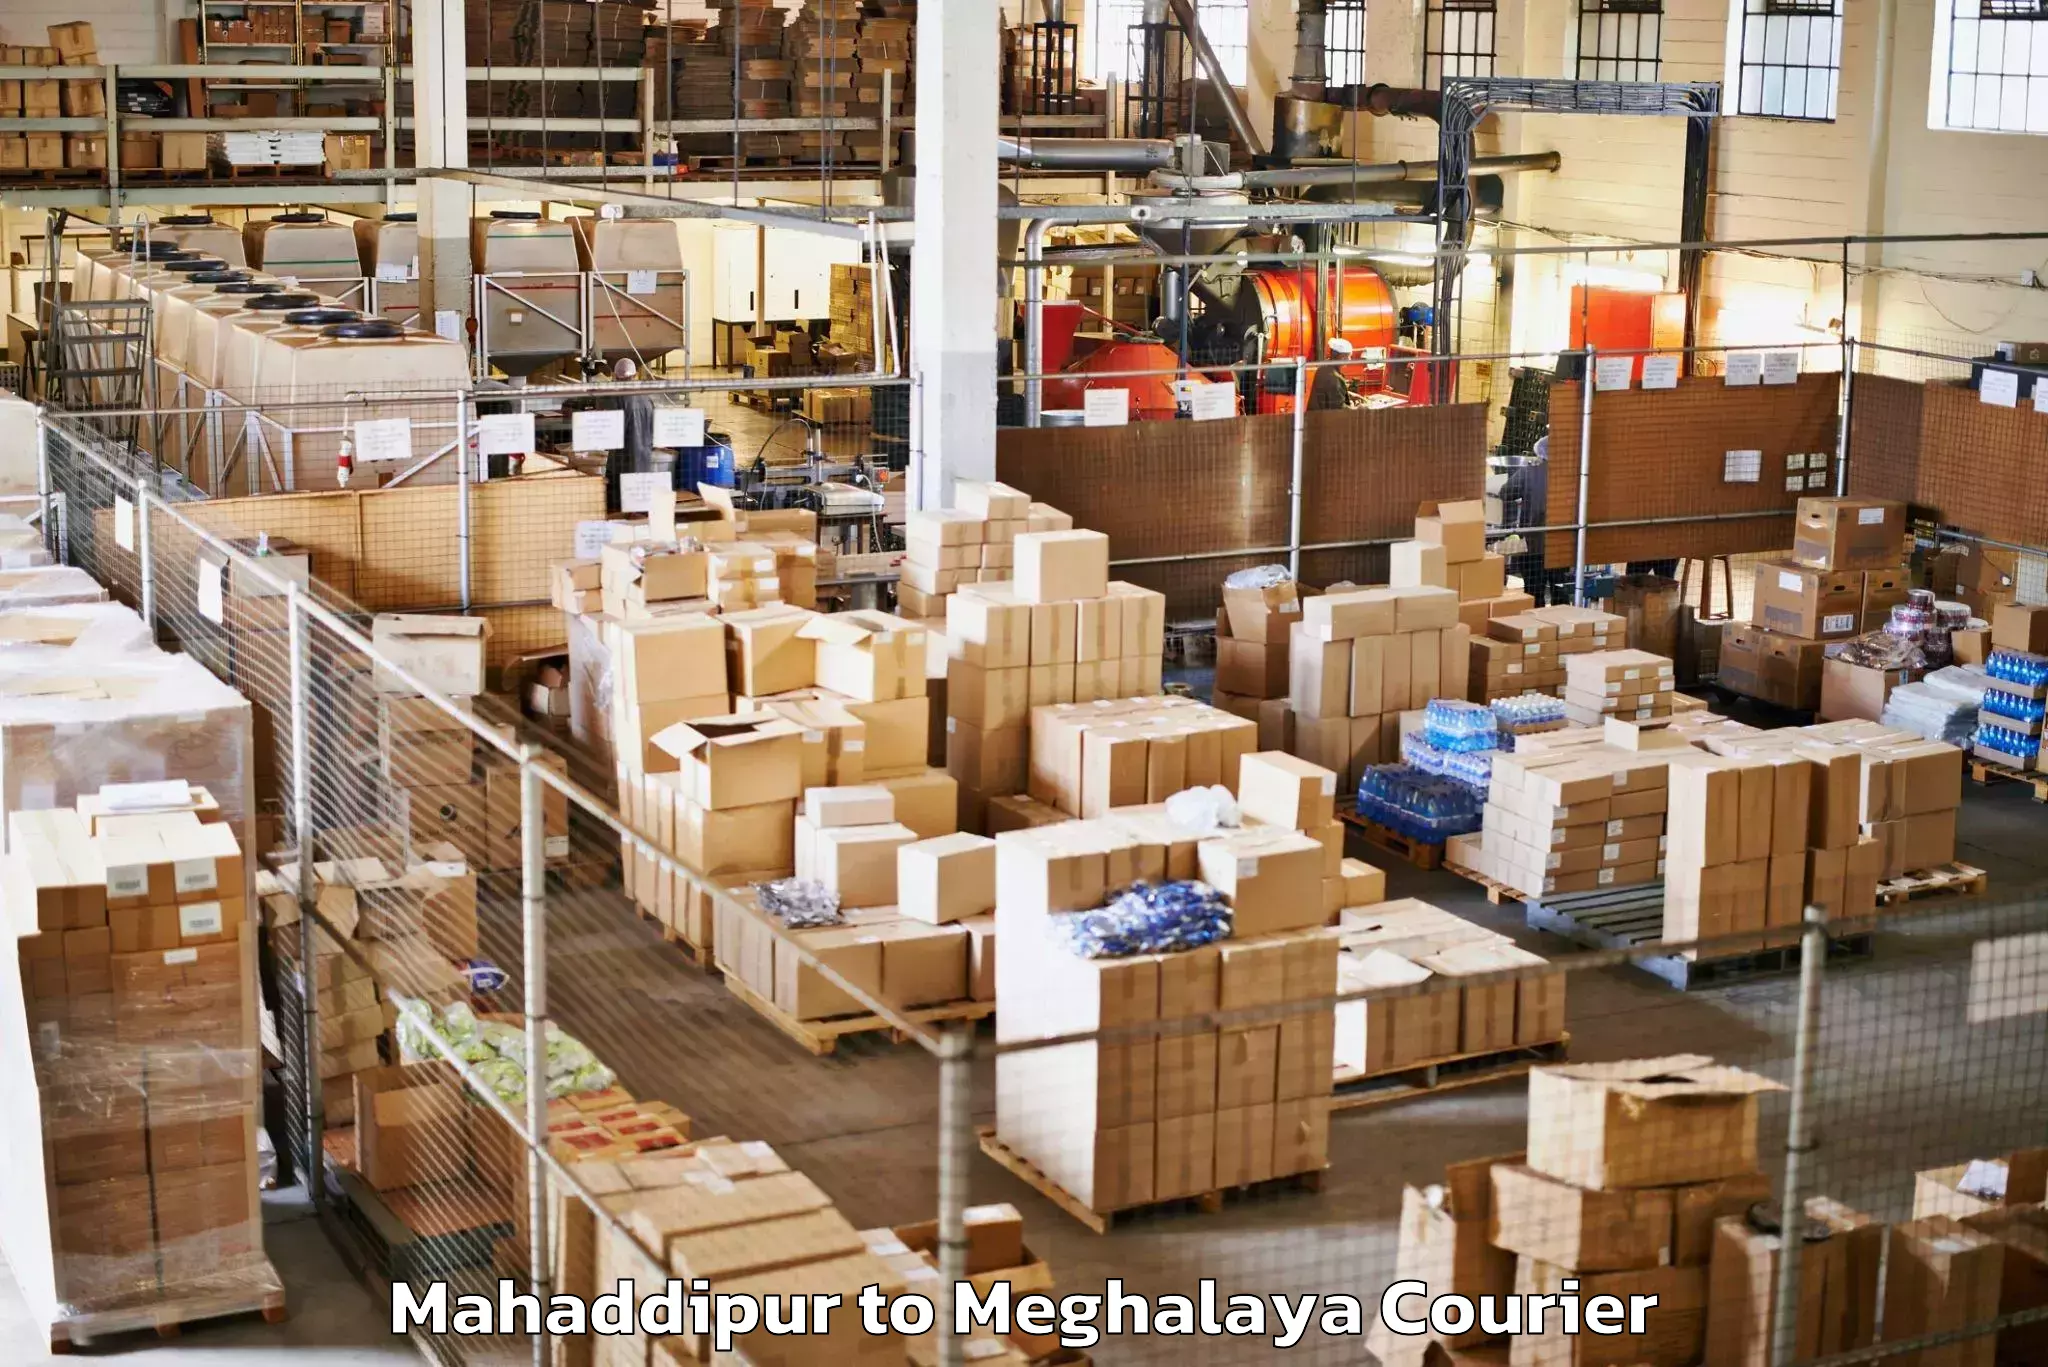 Luggage delivery operations in Mahaddipur to Phulbari